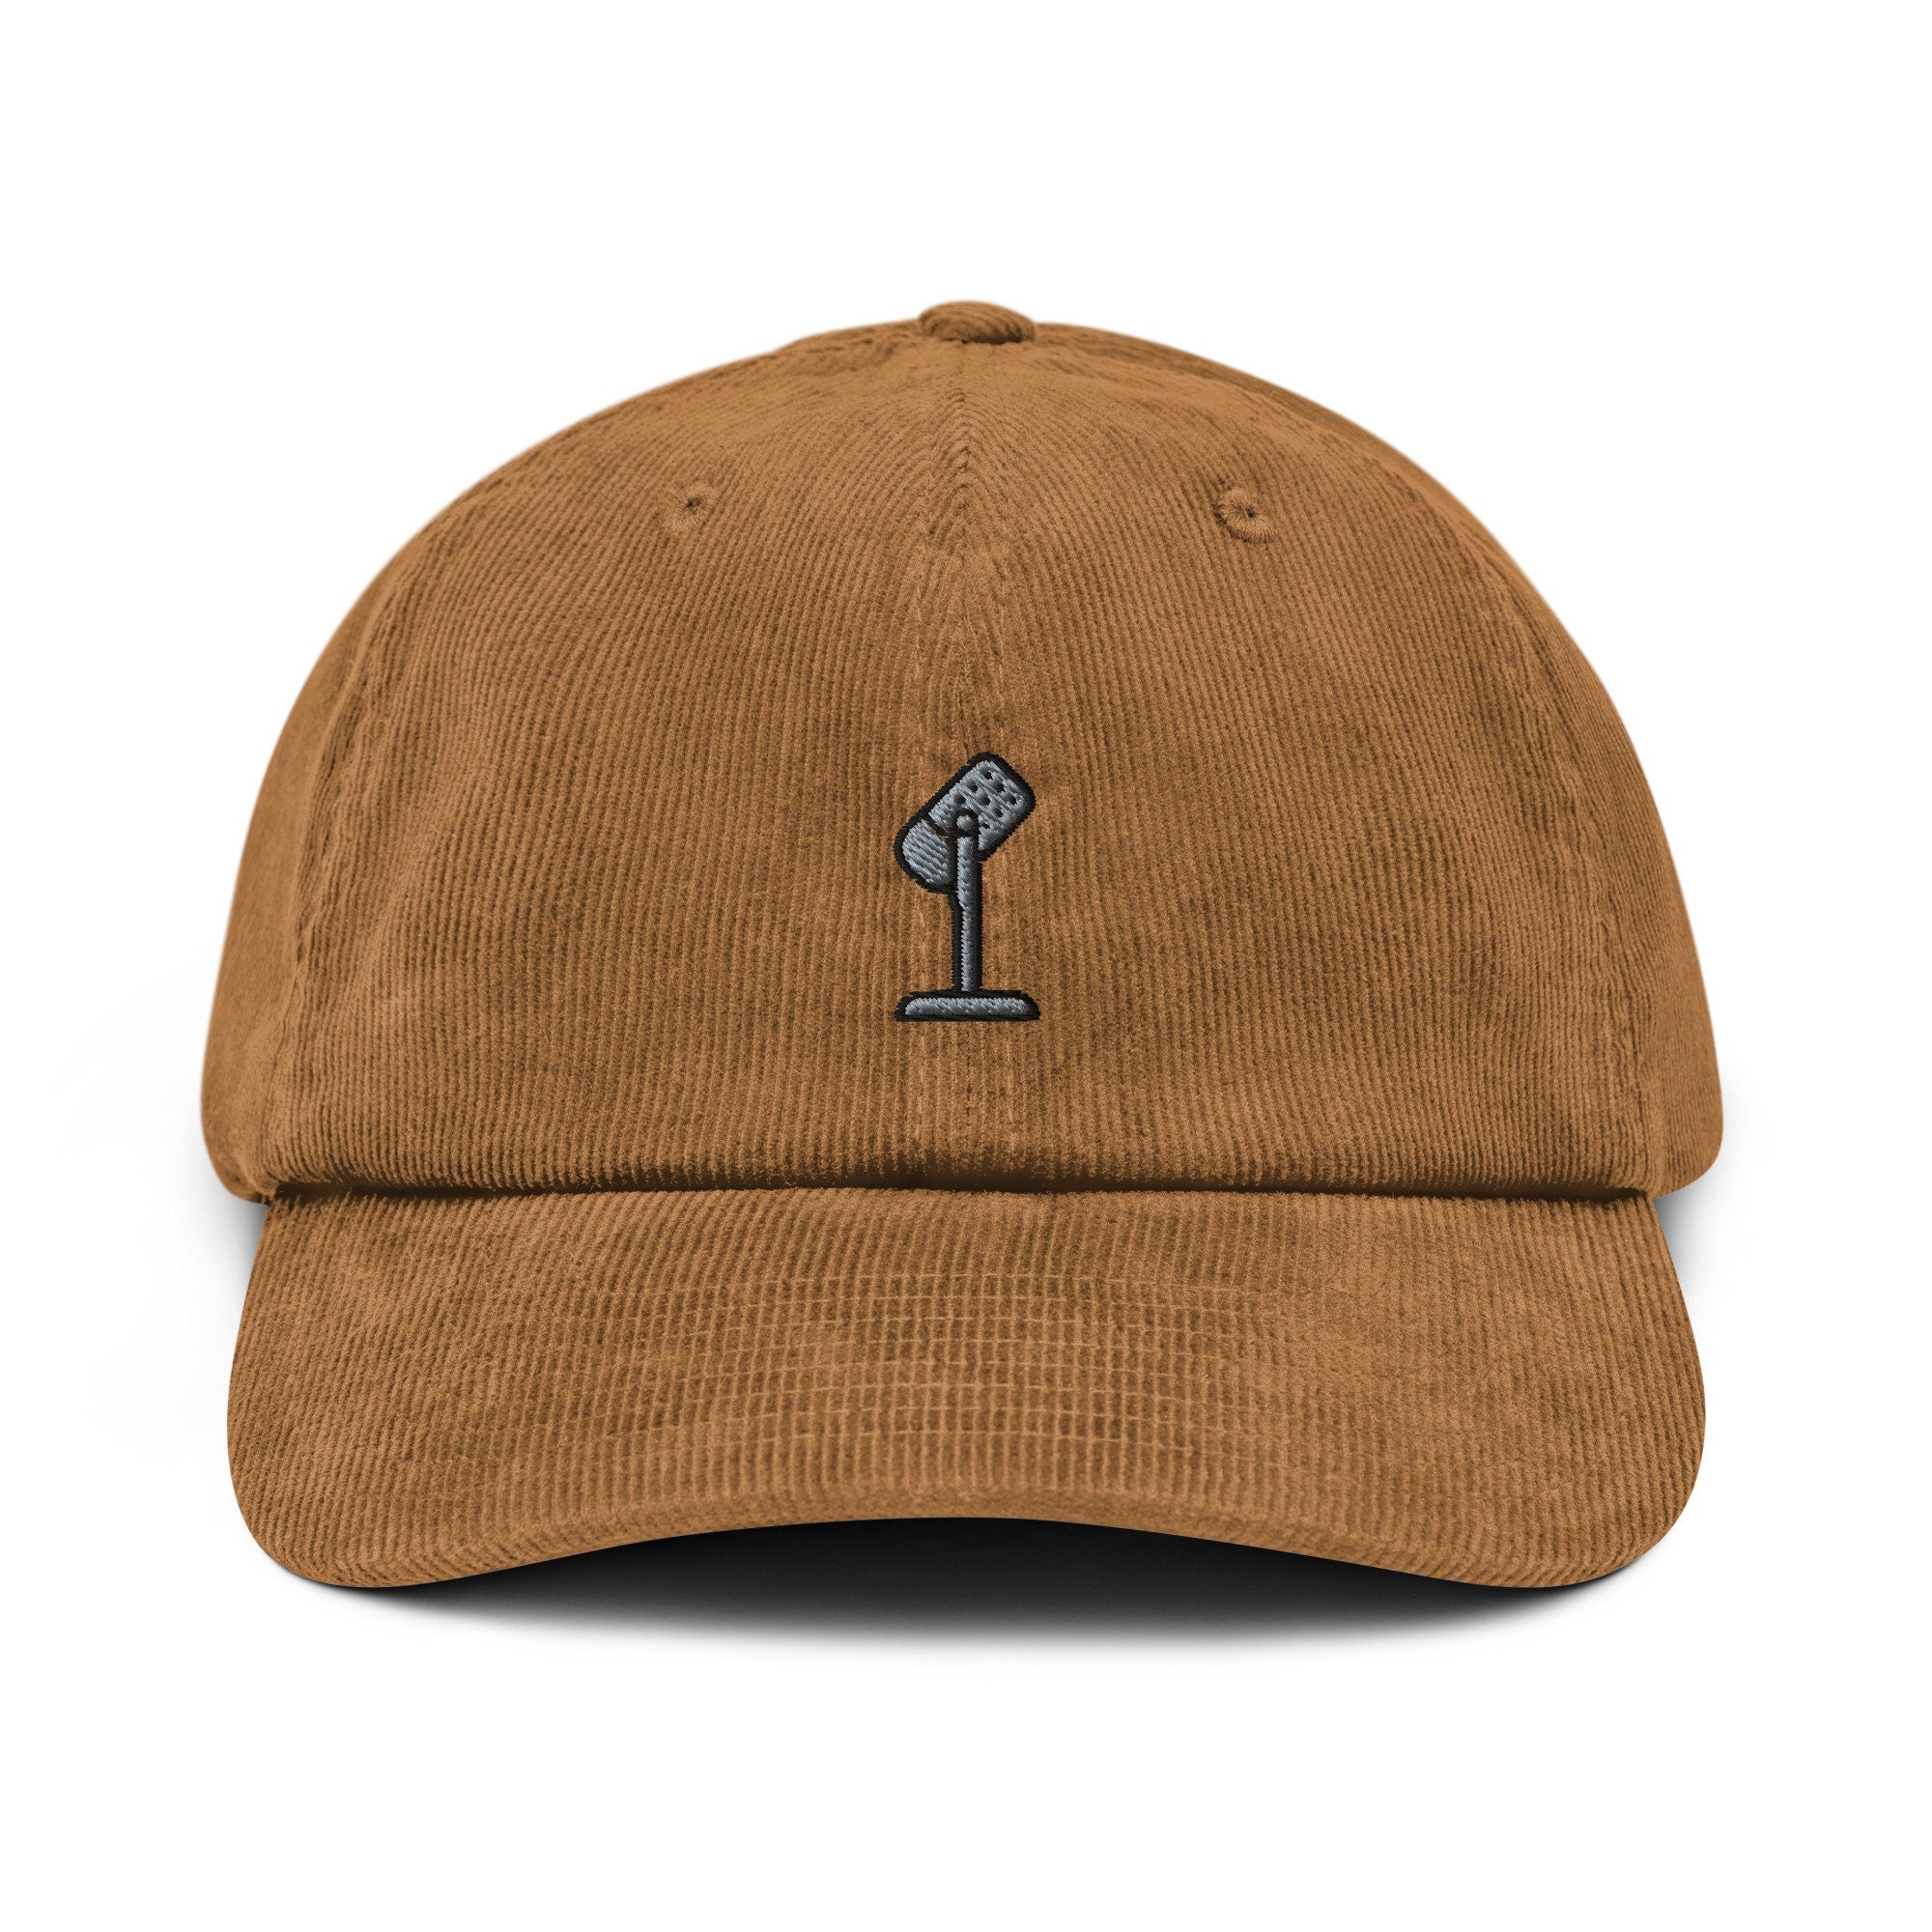 Podcast Microphone Corduroy Hat, Handmade Embroidered Corduroy Dad Cap - Multiple Colors